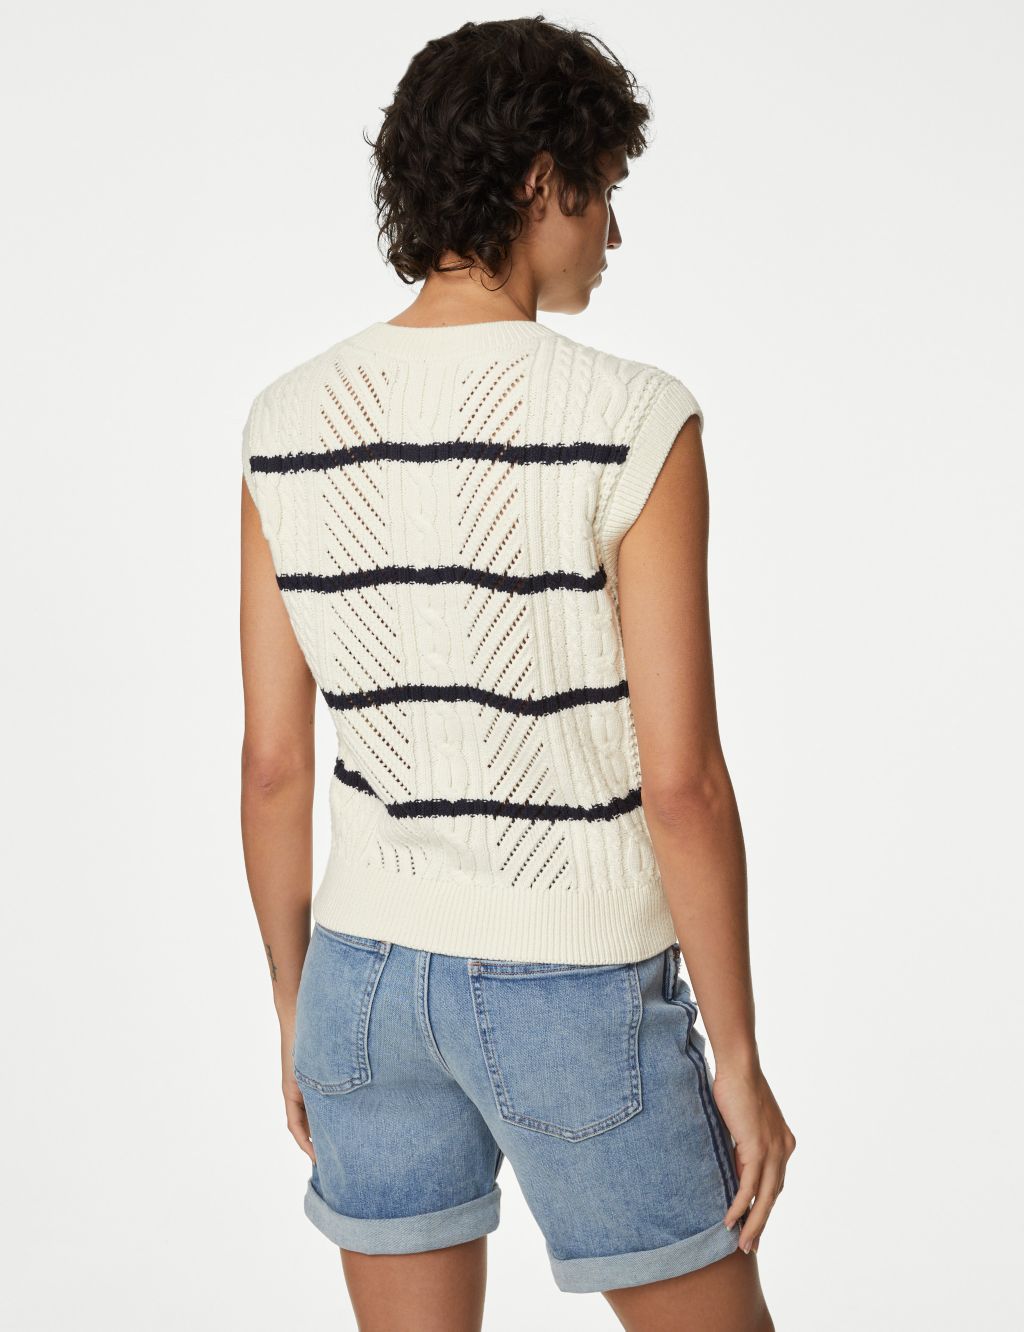 Cotton Rich Striped Crew Neck Knitted Vest image 4